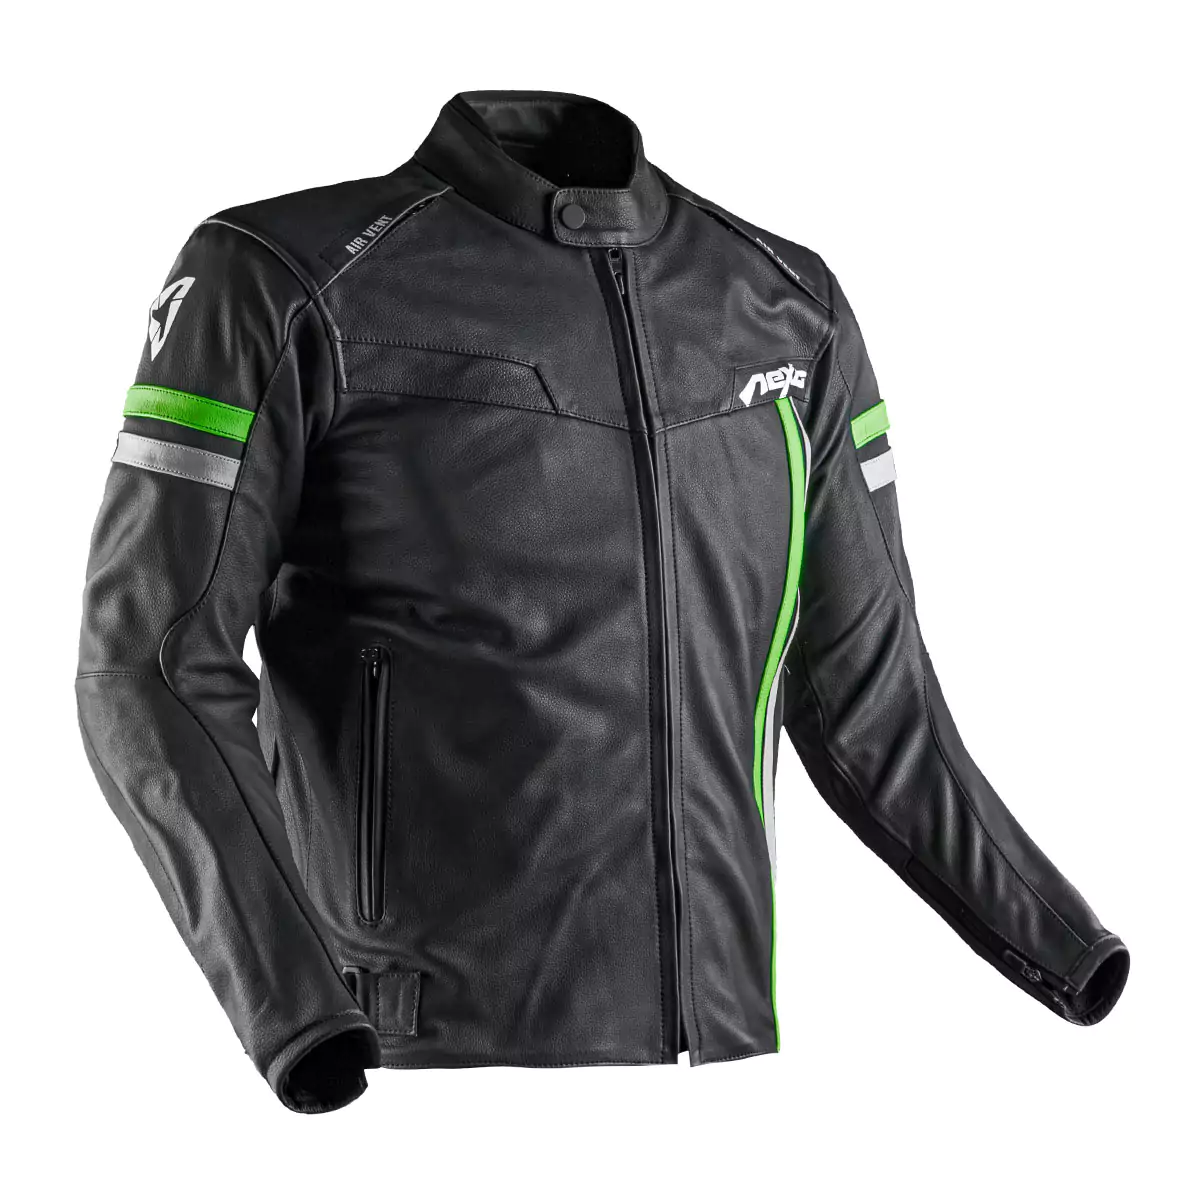 Mens leather motorcycle jacket with a classic design and multiple pockets.